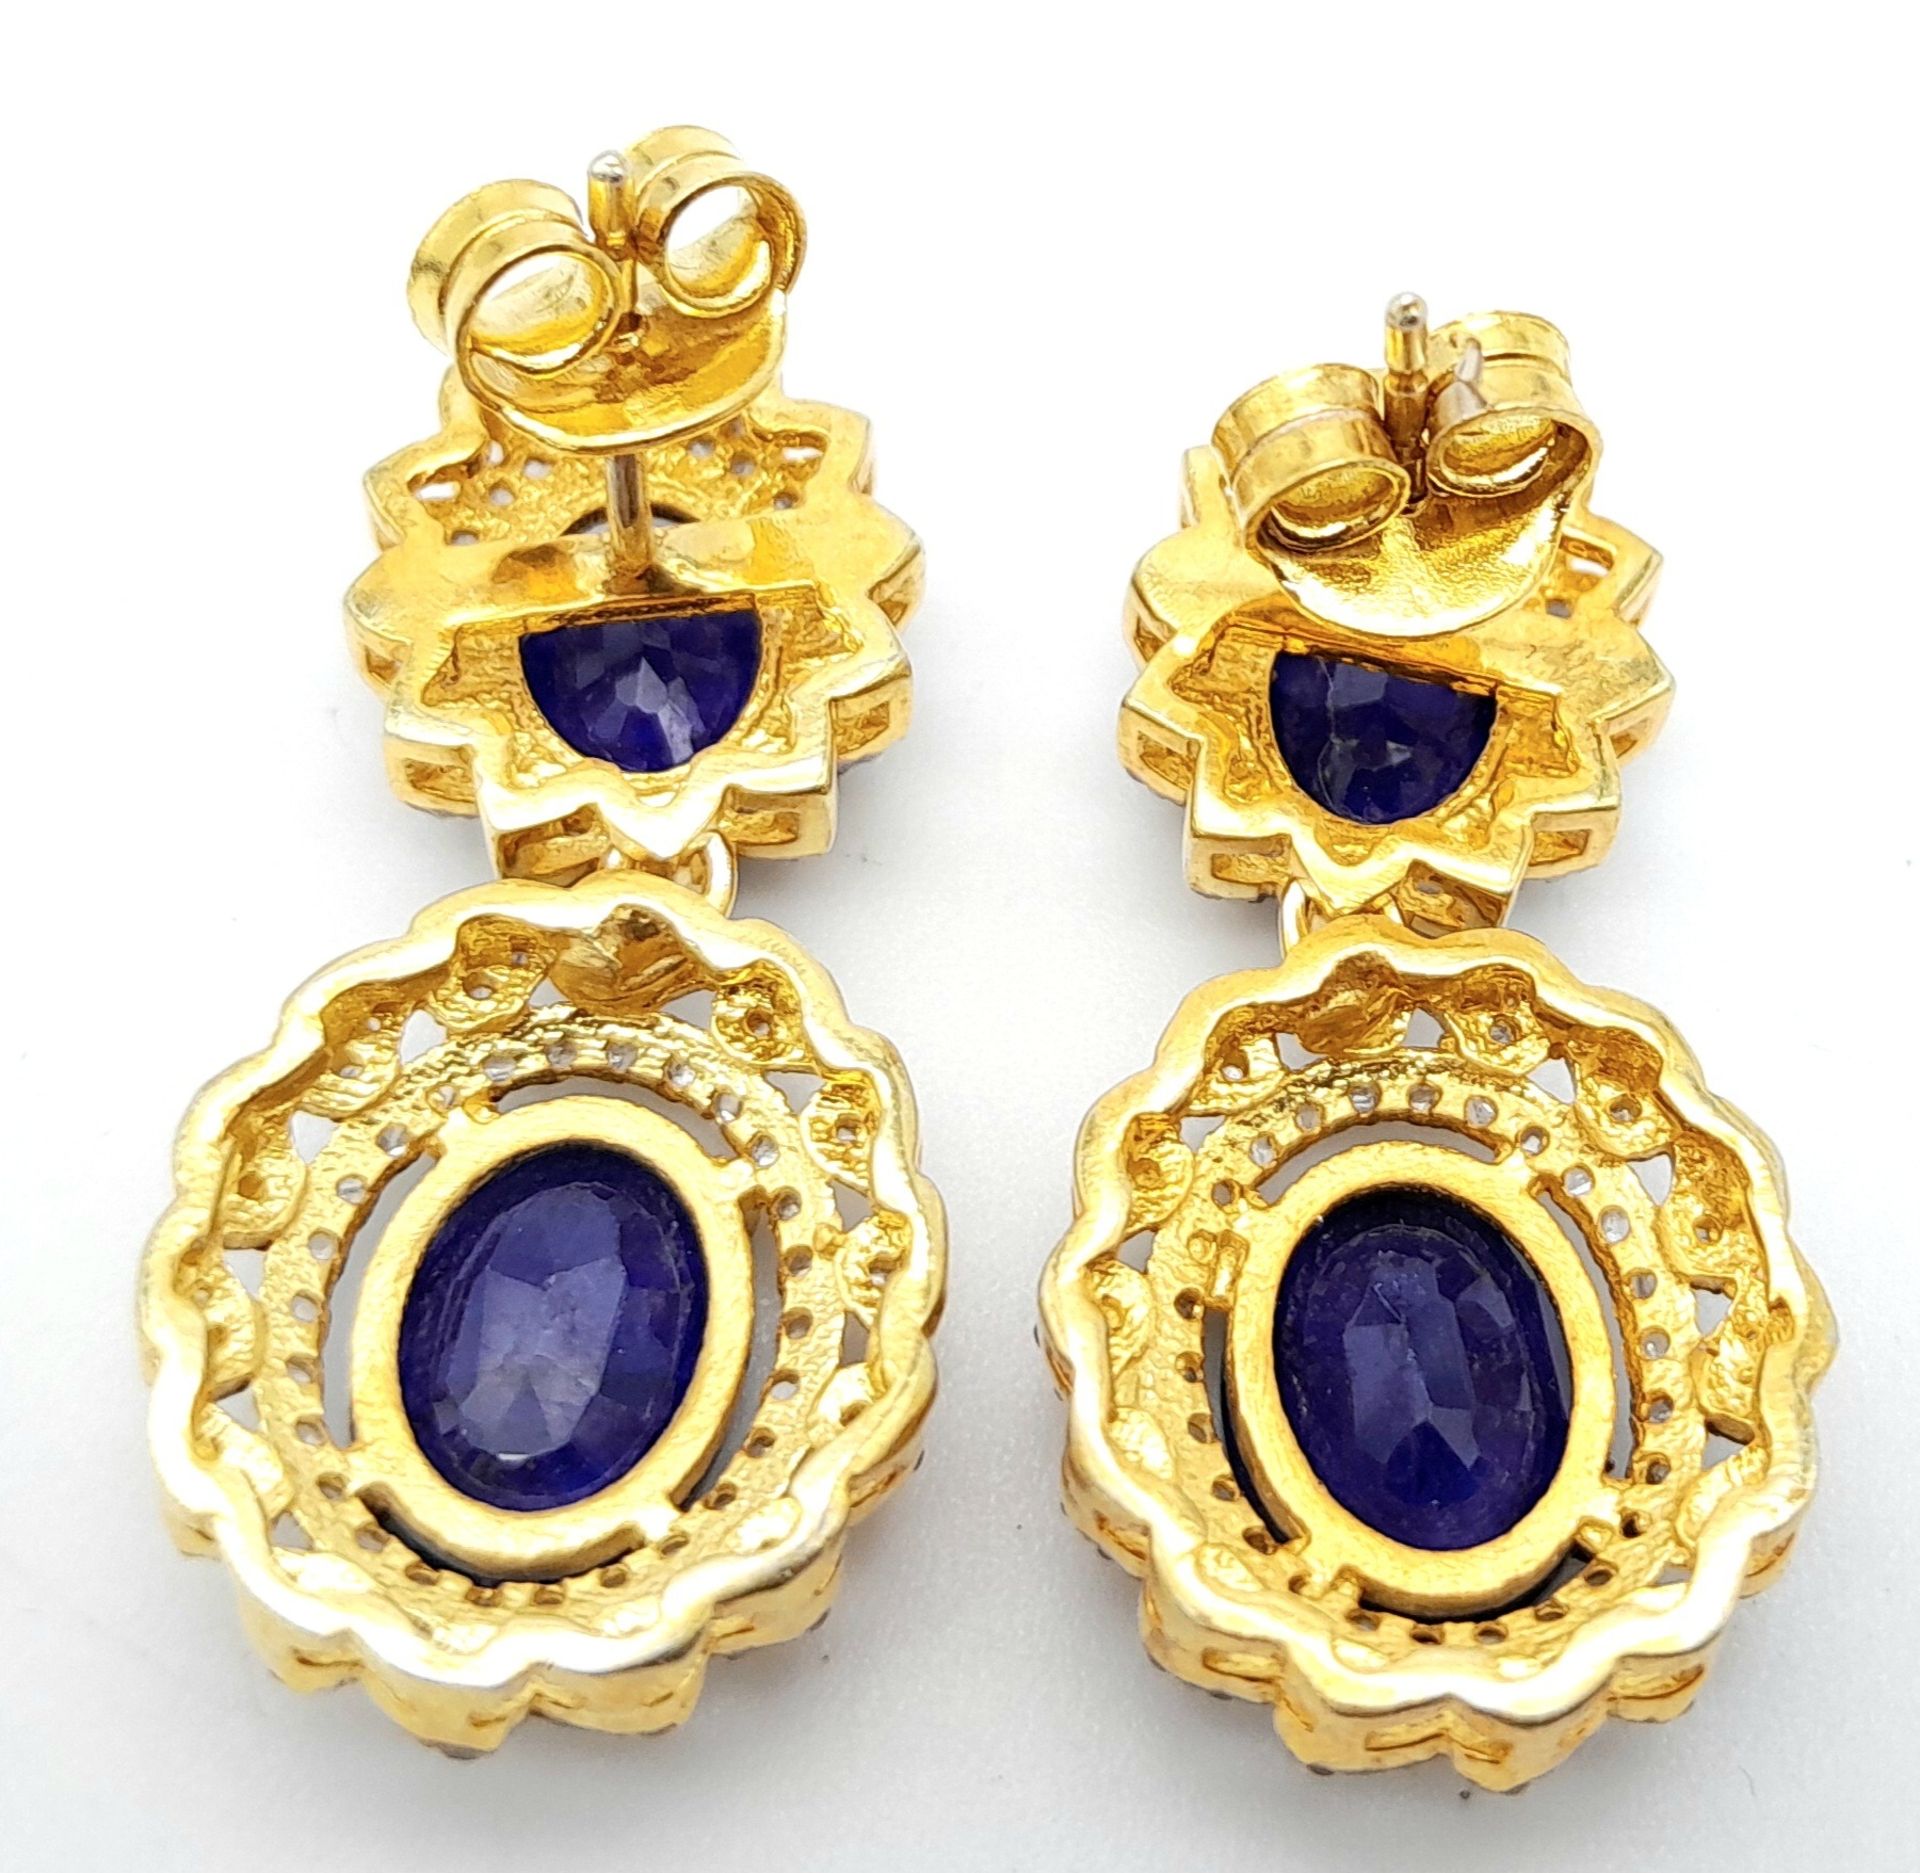 A Pair of Blue Sapphire Gemstone Drop Earrings with Diamond Surrounds. Set in gilded 925 Silver. - Image 2 of 5